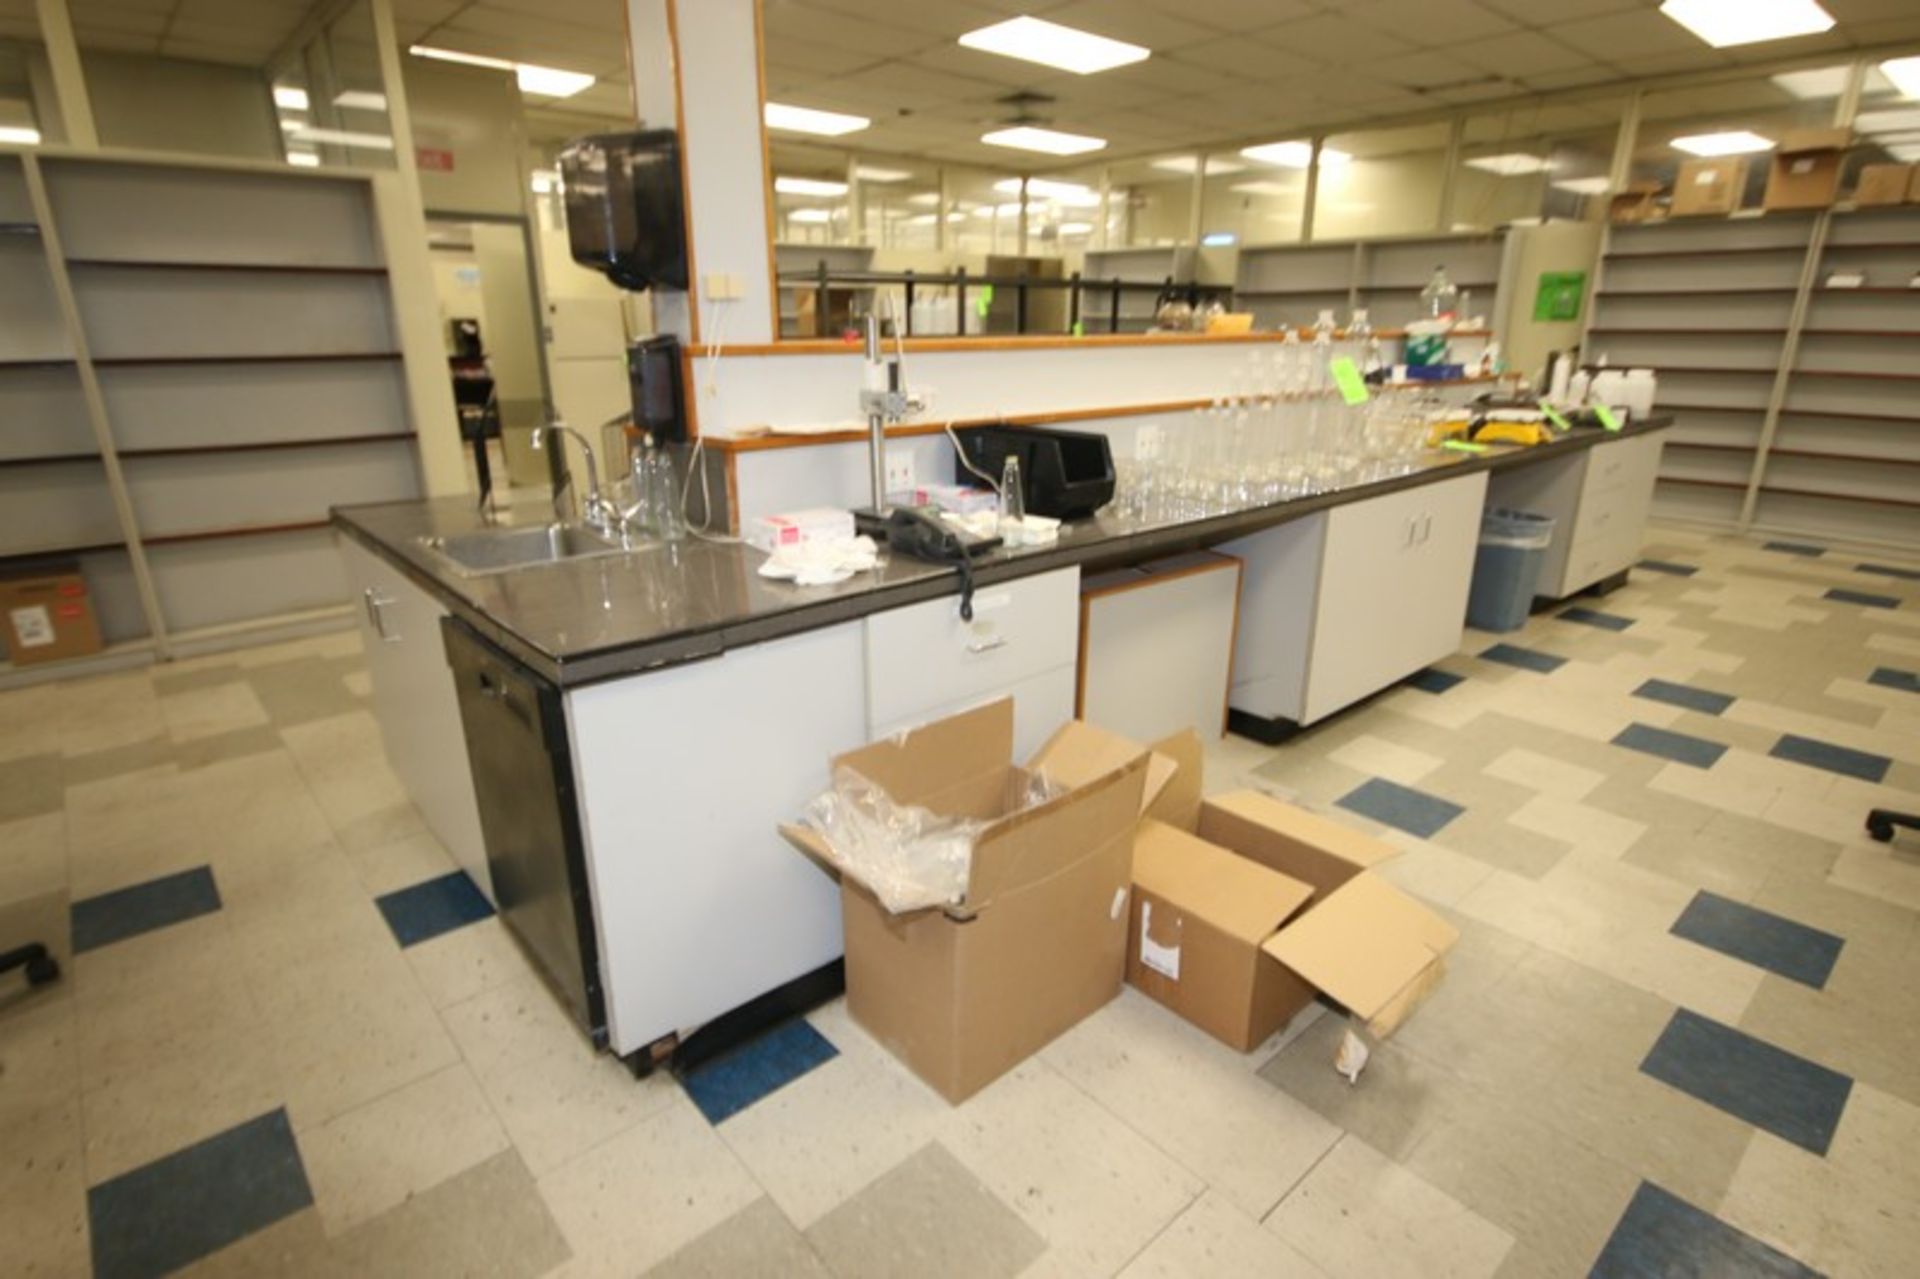 Lab Counter Island with Bottom Cabinets, with Built in S/S Sink, Overall Dims.: Aprox. 27' L x 6' - Image 2 of 3